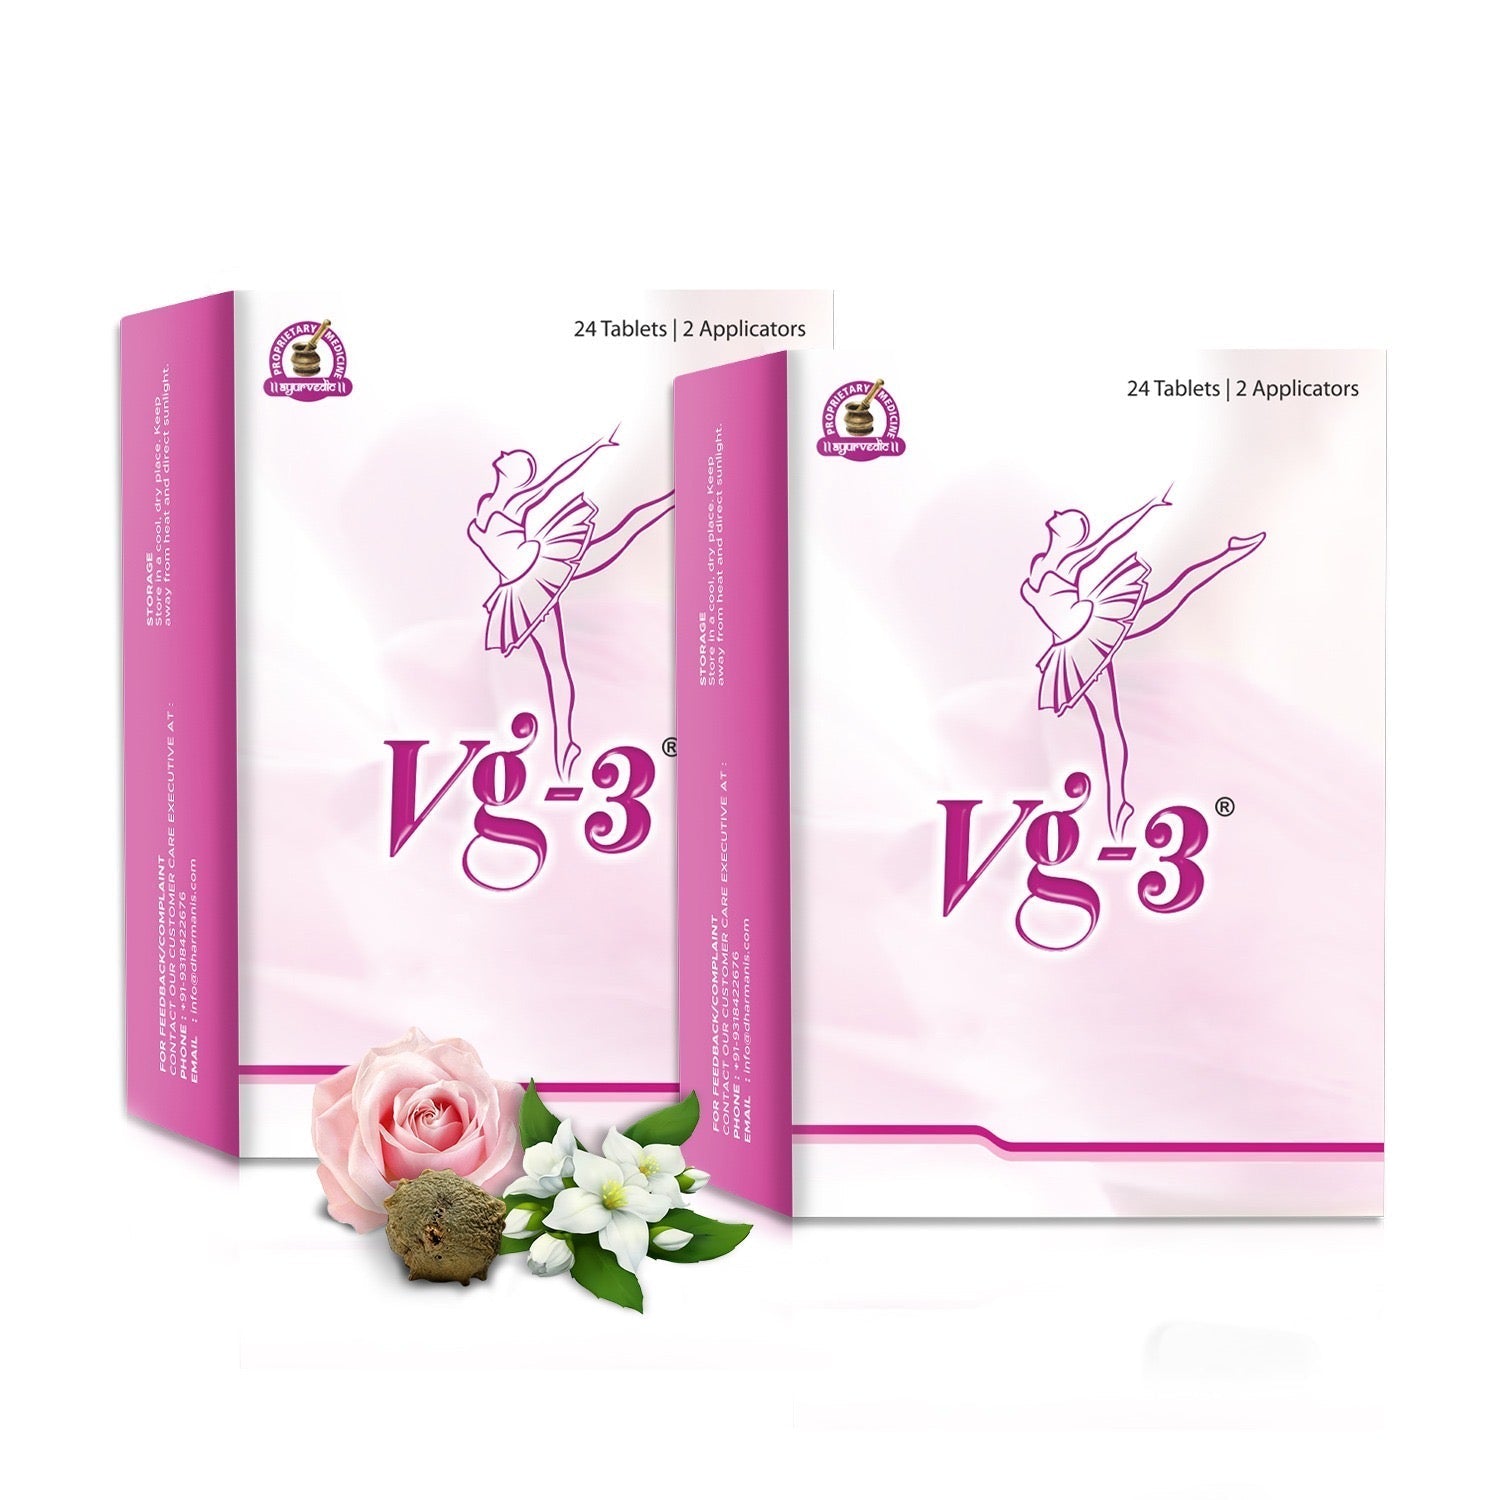 Vg3 Pack Of 2